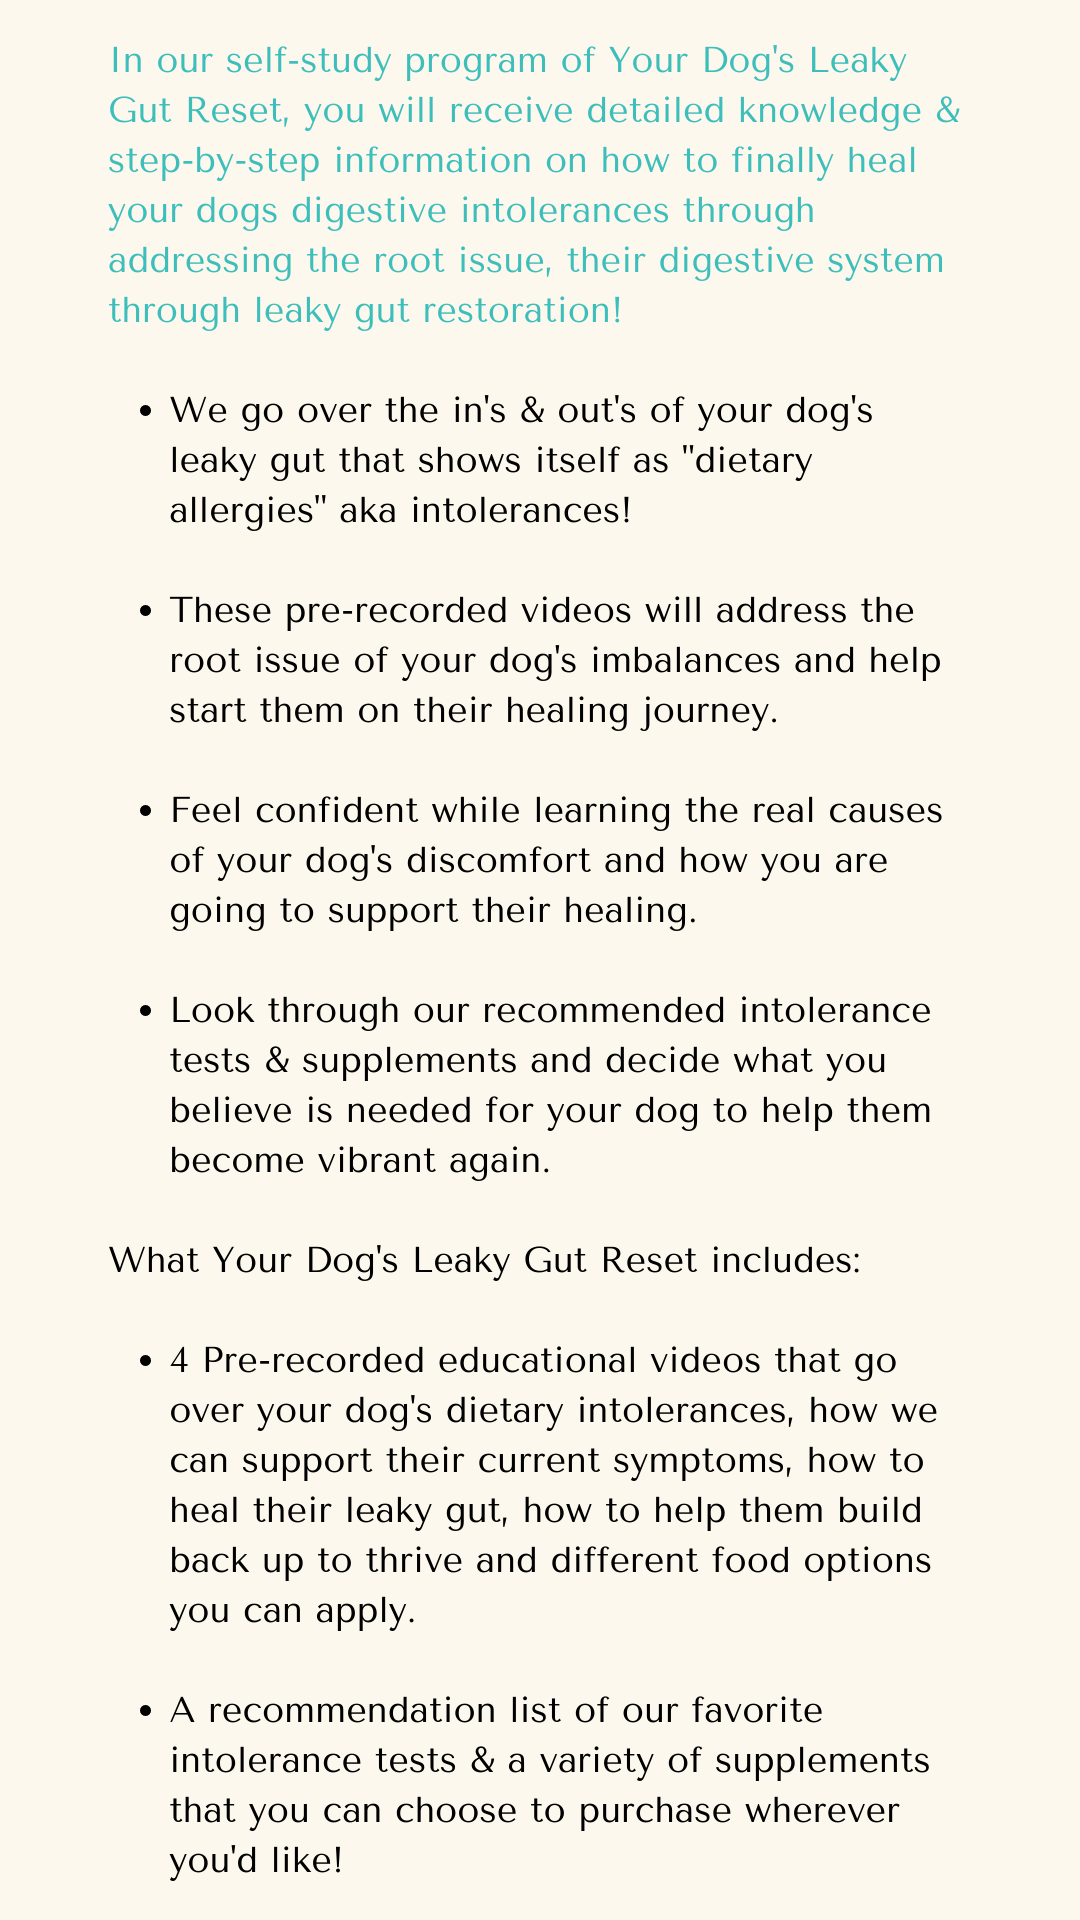 Your dog&#39;s leaky gut protocol information what comes with your healing videos